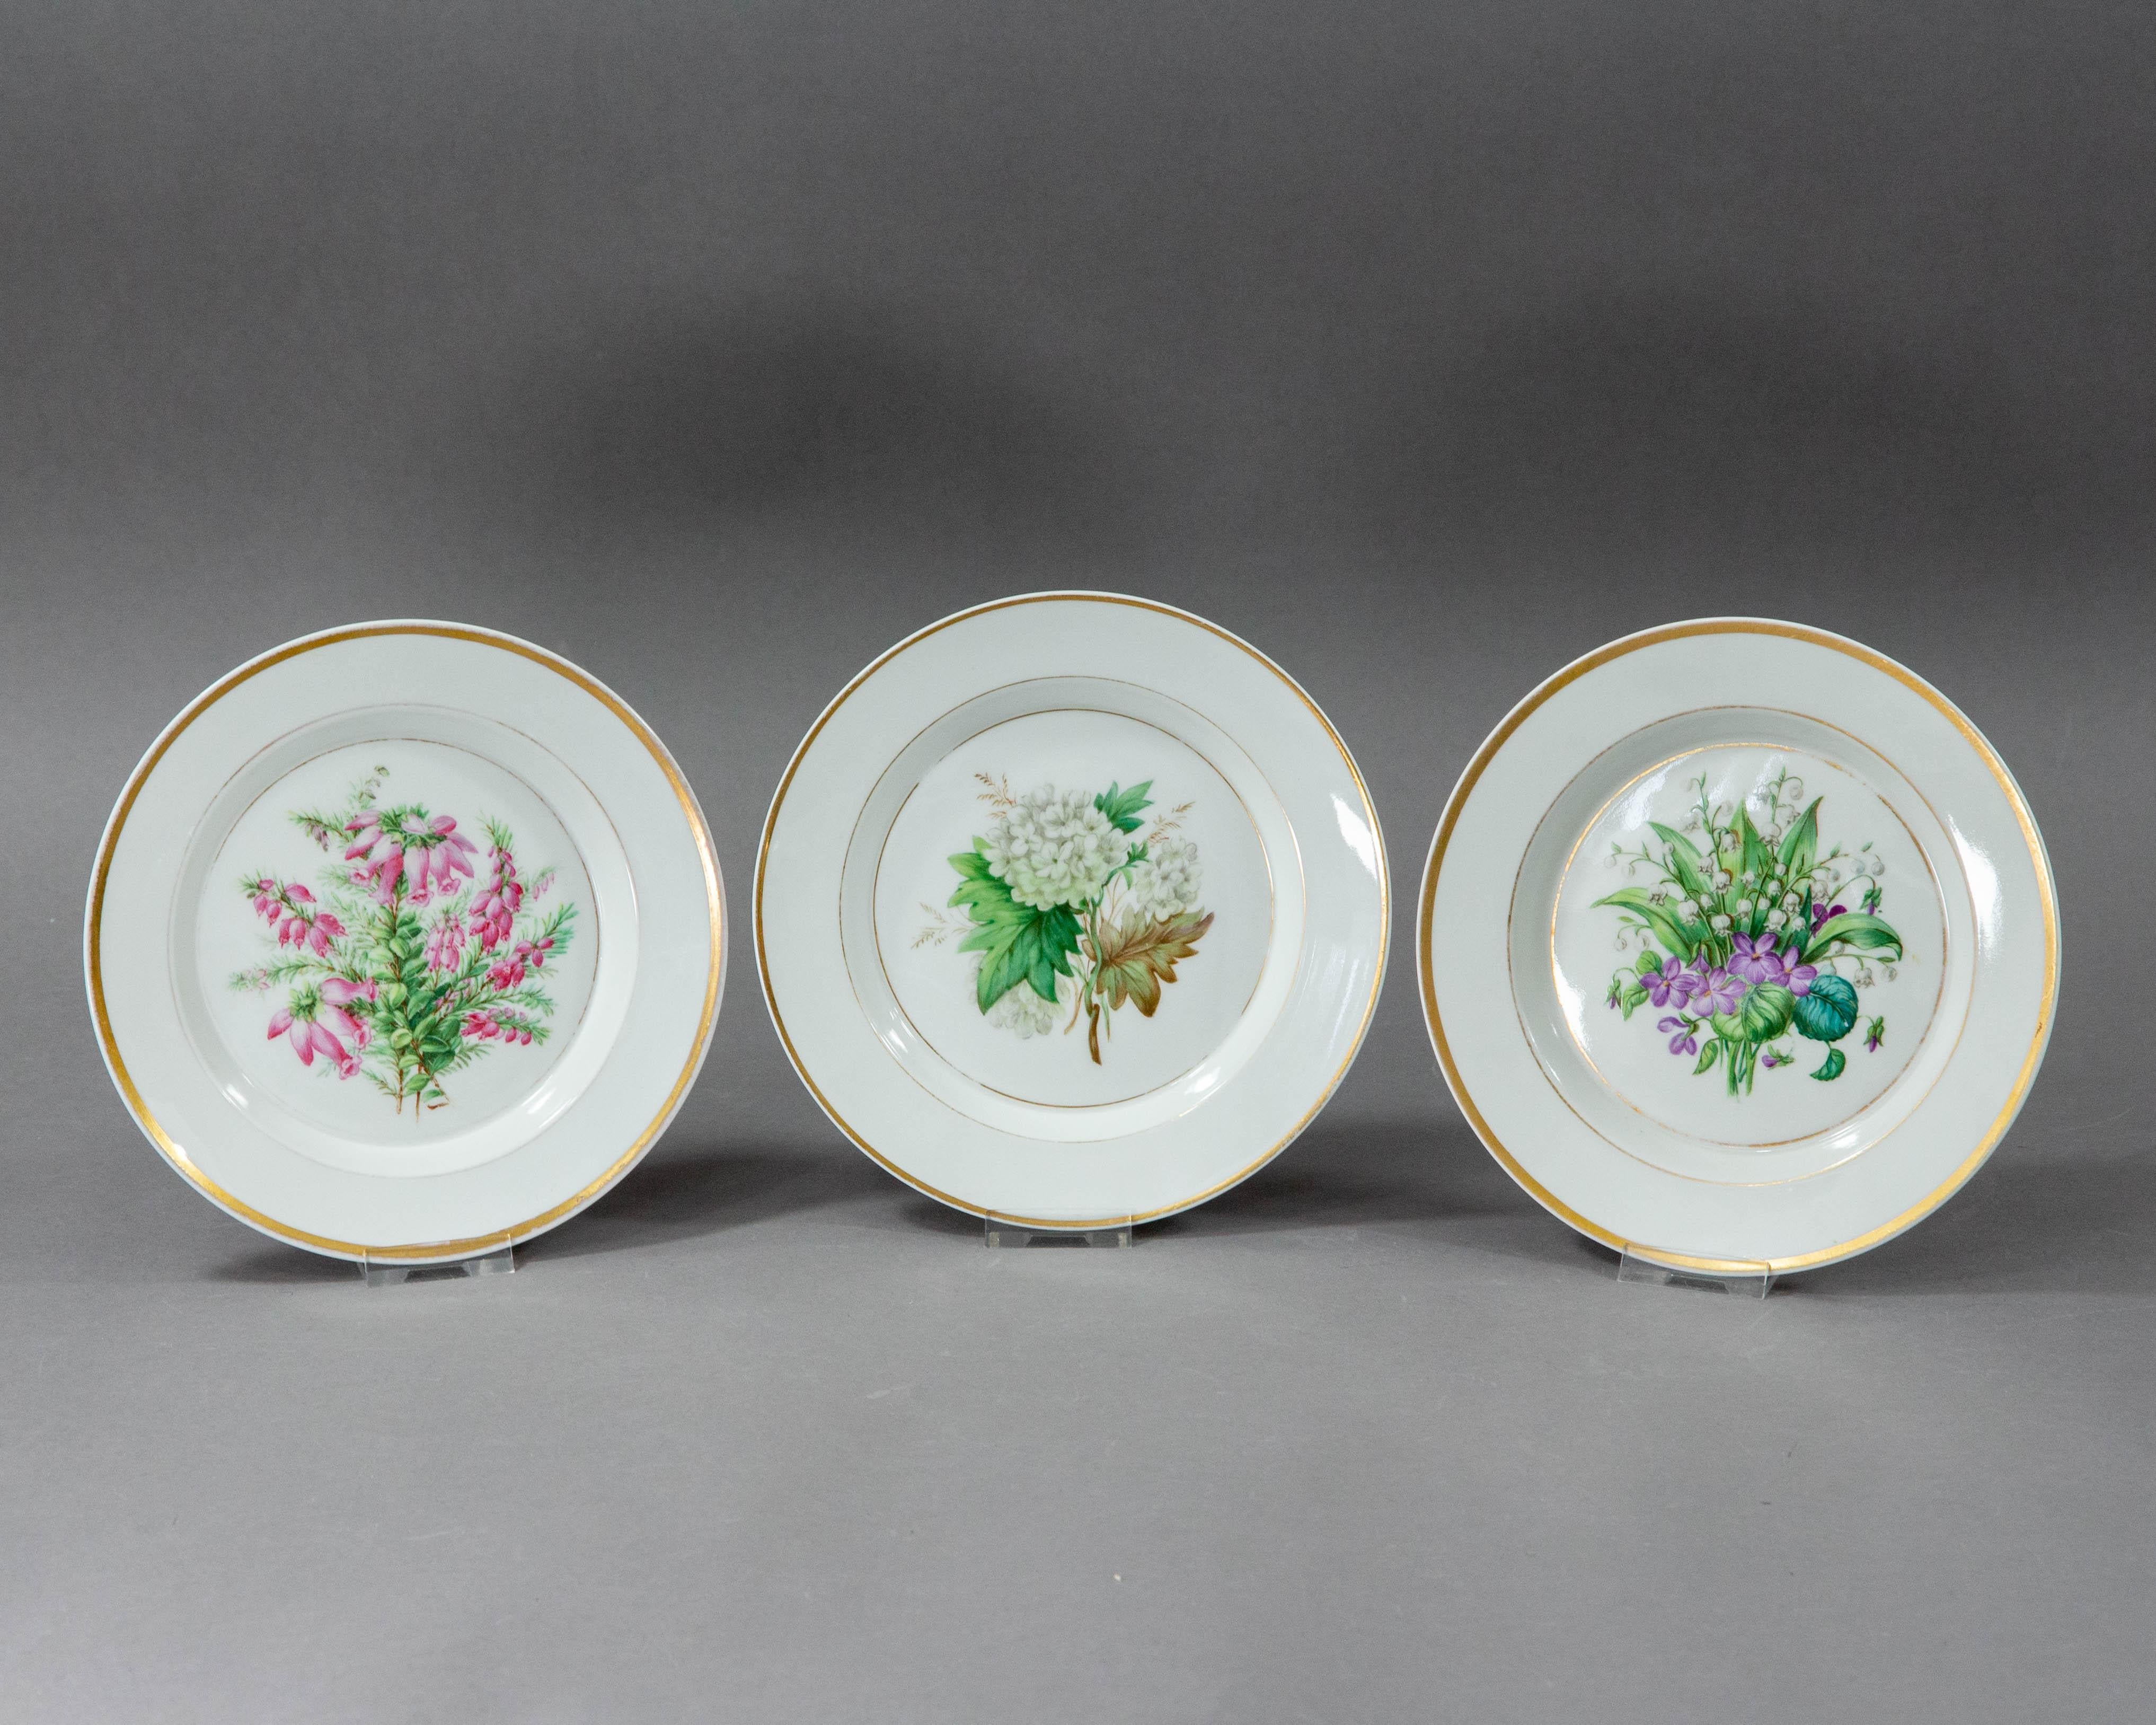 A set of beautiful porcelain plates made at the Königliche Porzellan Manufaktur in Berlin in the 1860s.

The set consists of three plates with gold rims and hand painted botanic decorations. 

The plates have consistent marking in underglaze